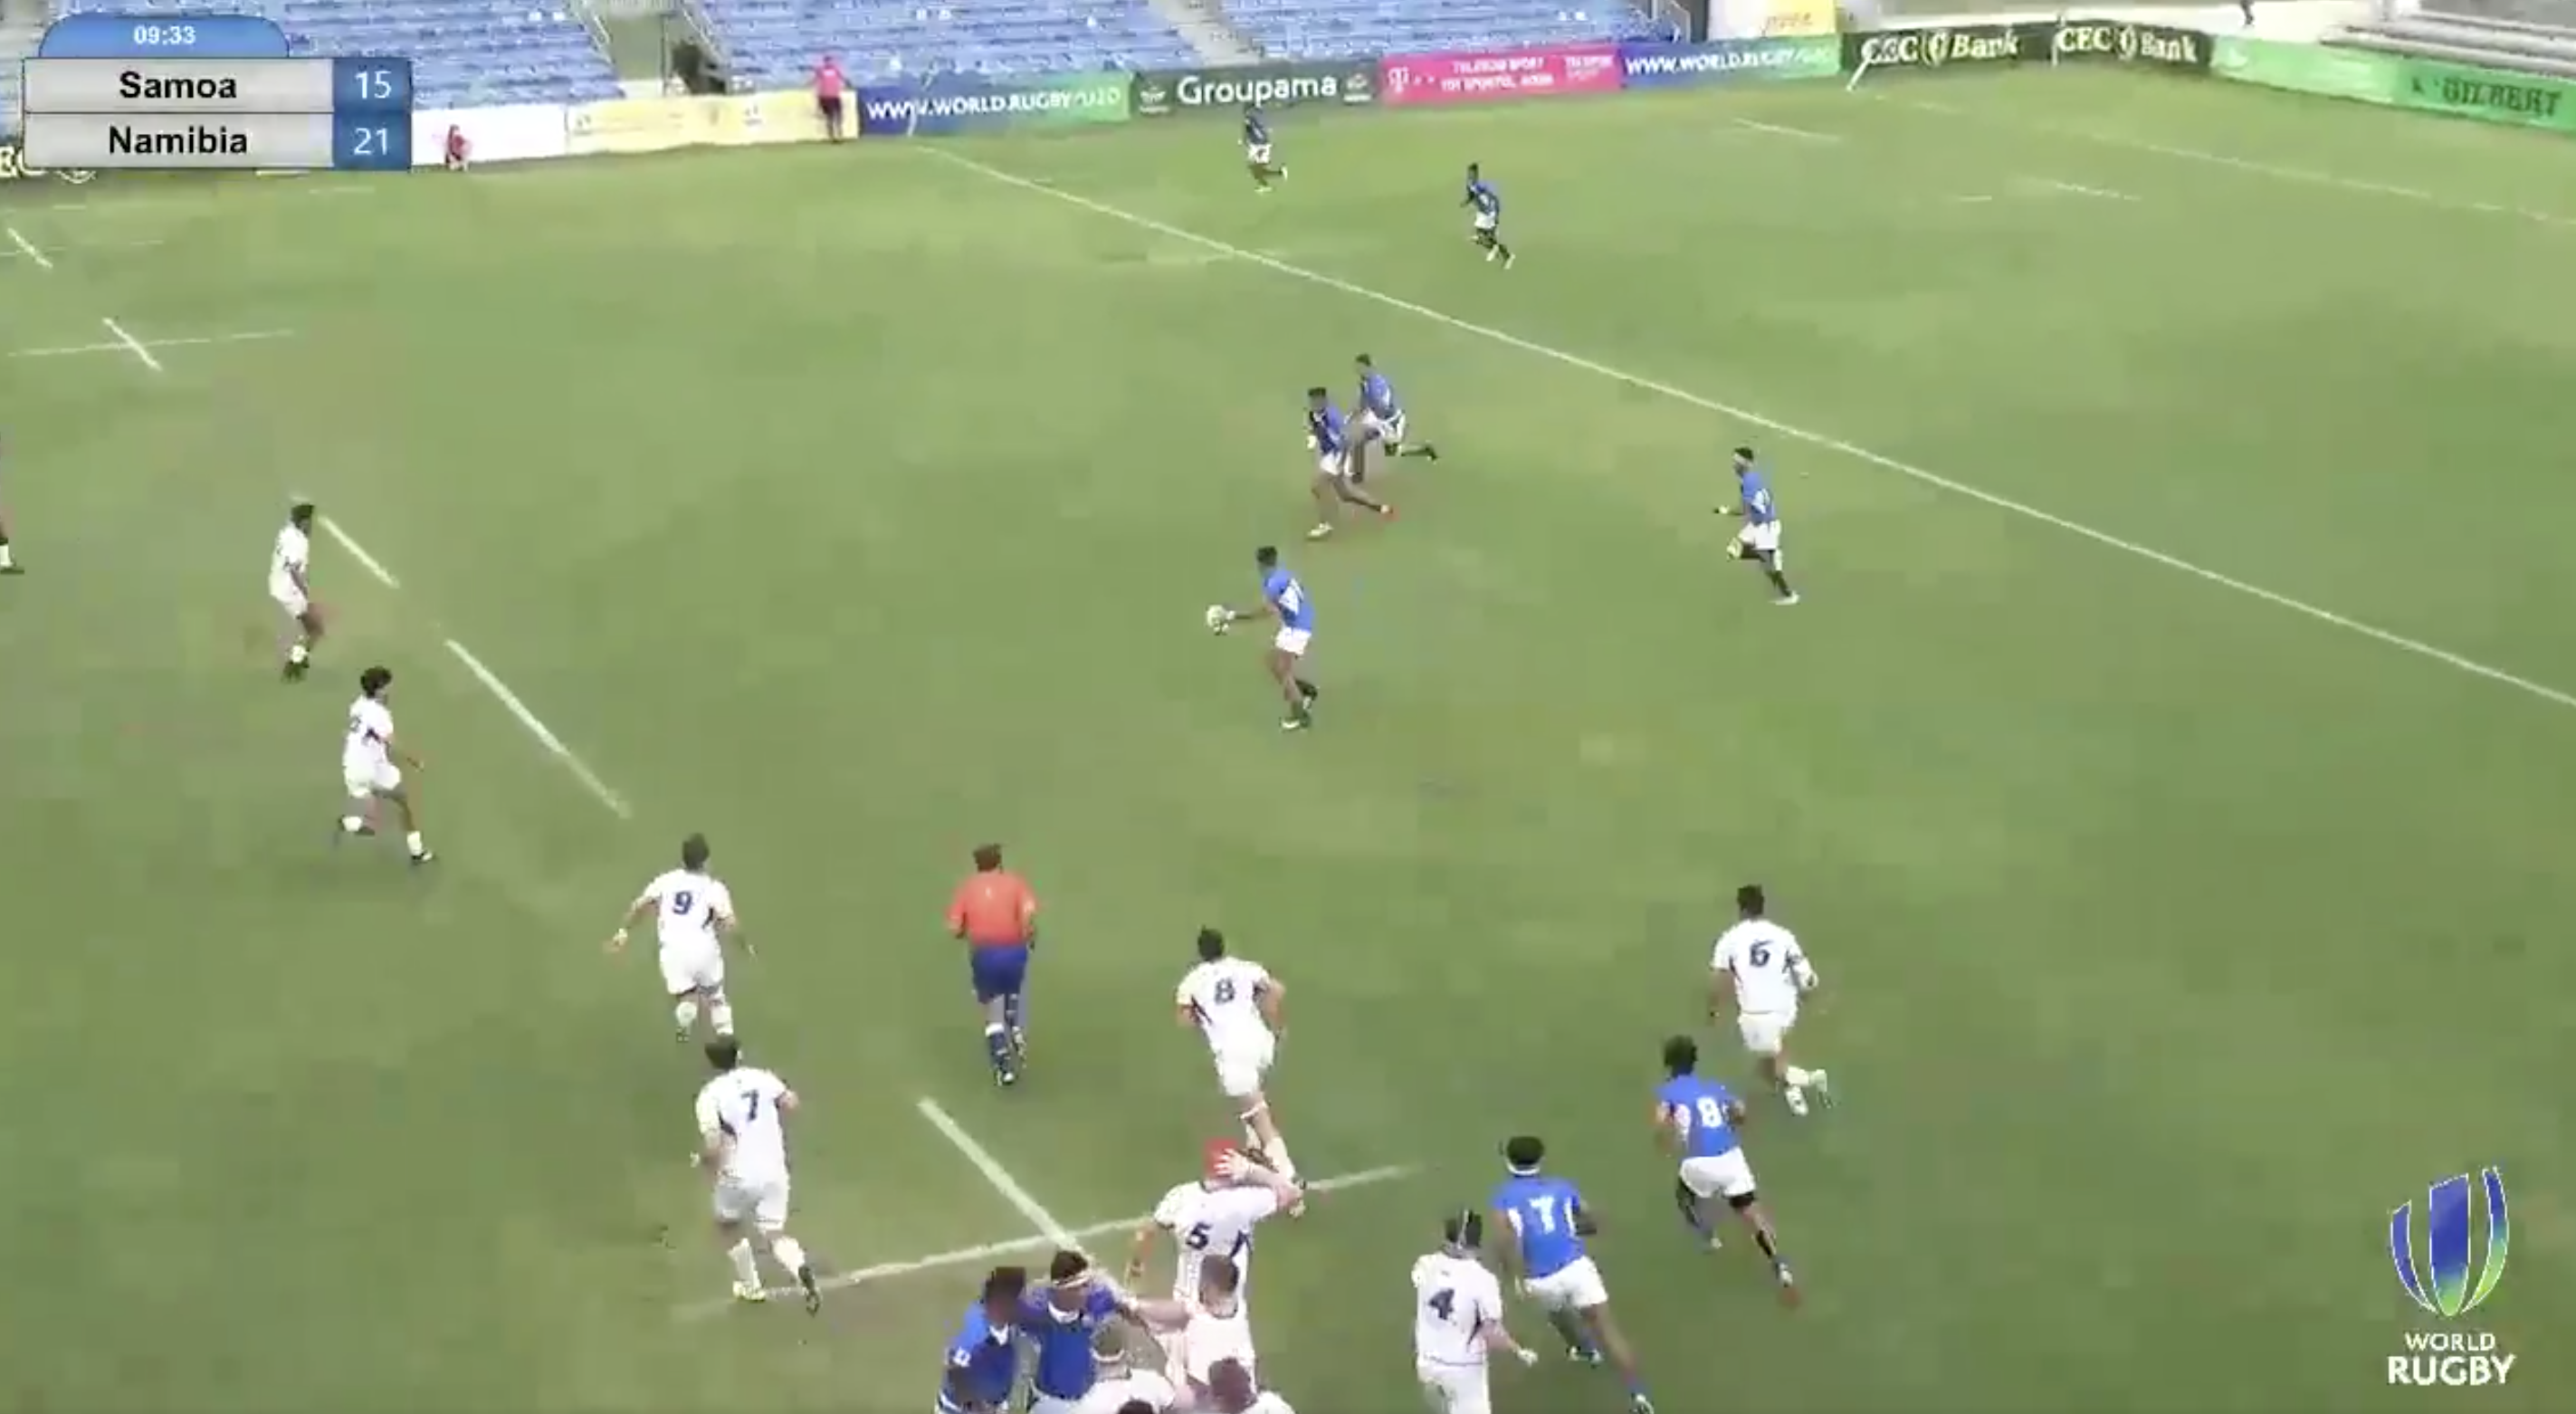 WATCH: Samoa Under 20's go FULL HORRIBLE with a set piece move that rightly receives rapturous applause